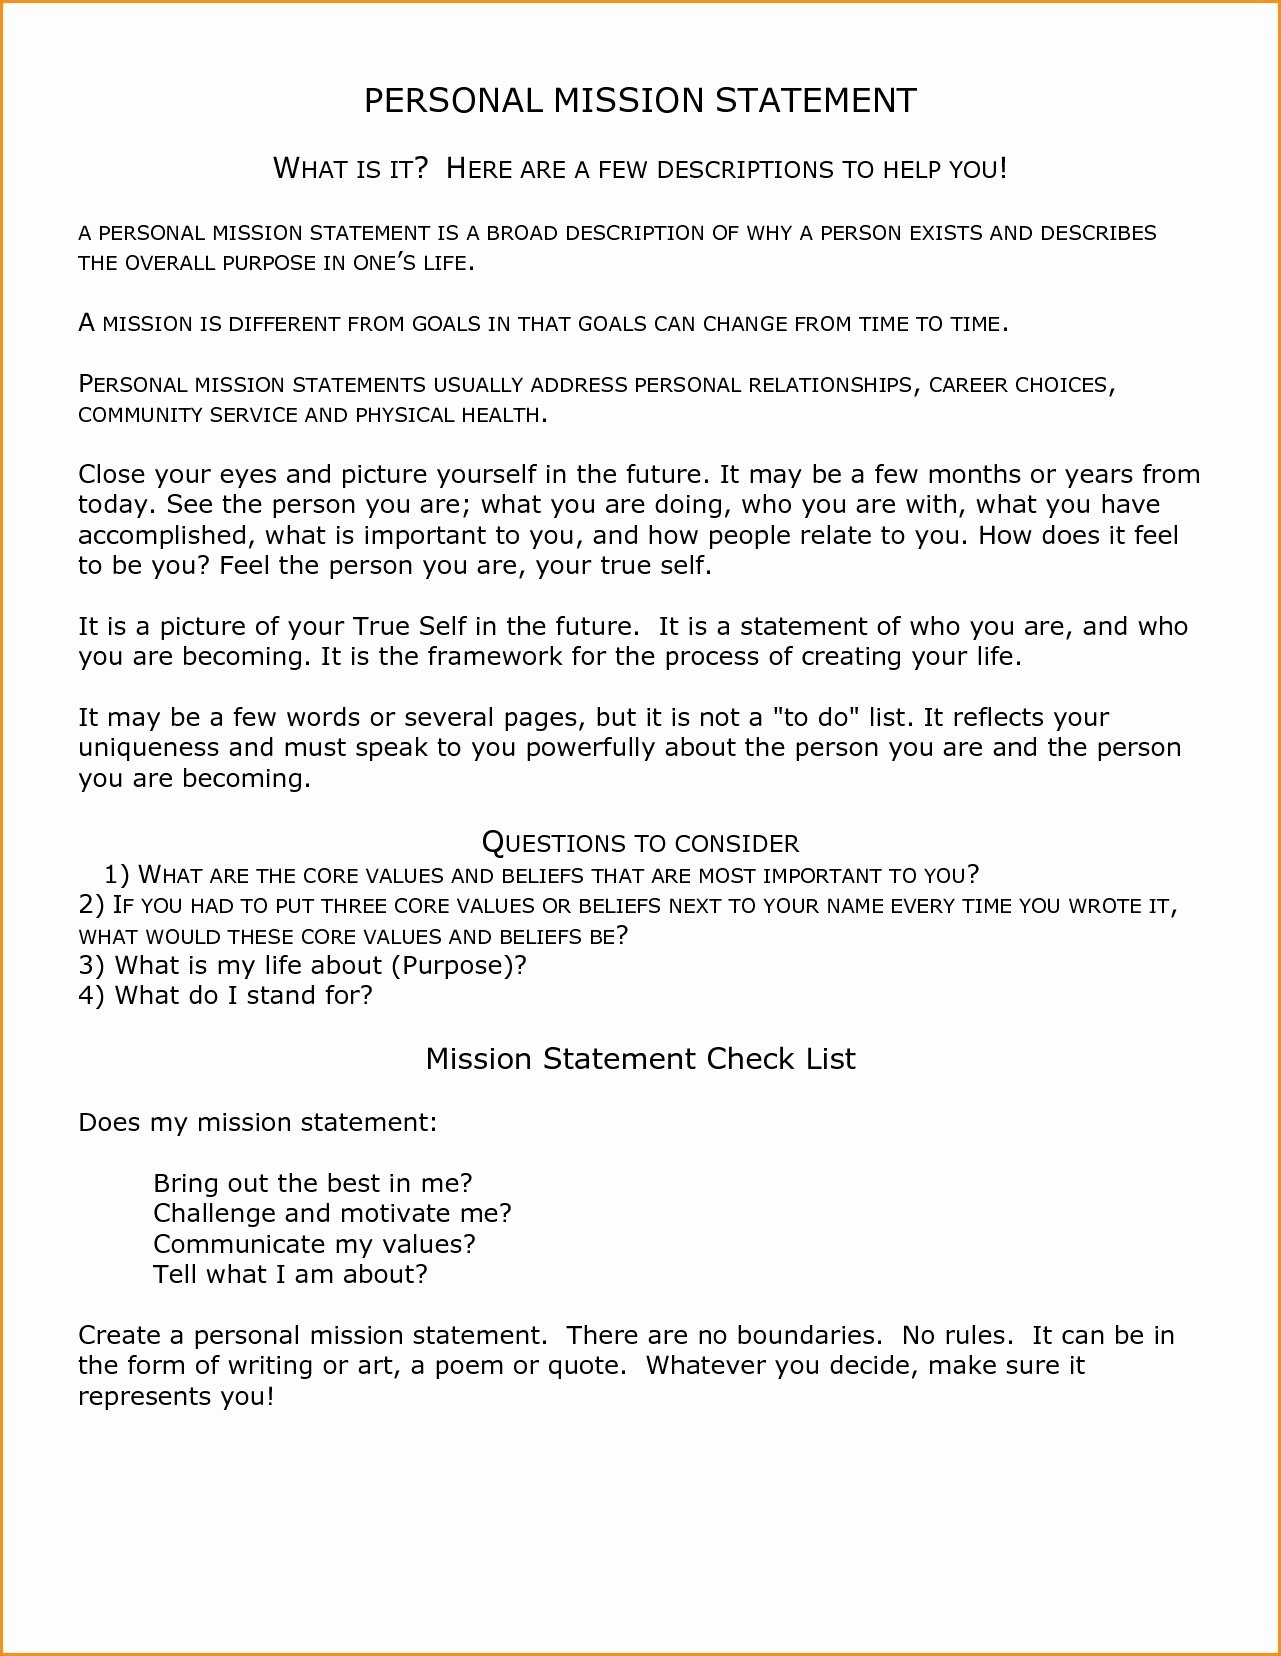 Mission Statement Examples for Students Elegant Personal Mission Statement Examples for Students